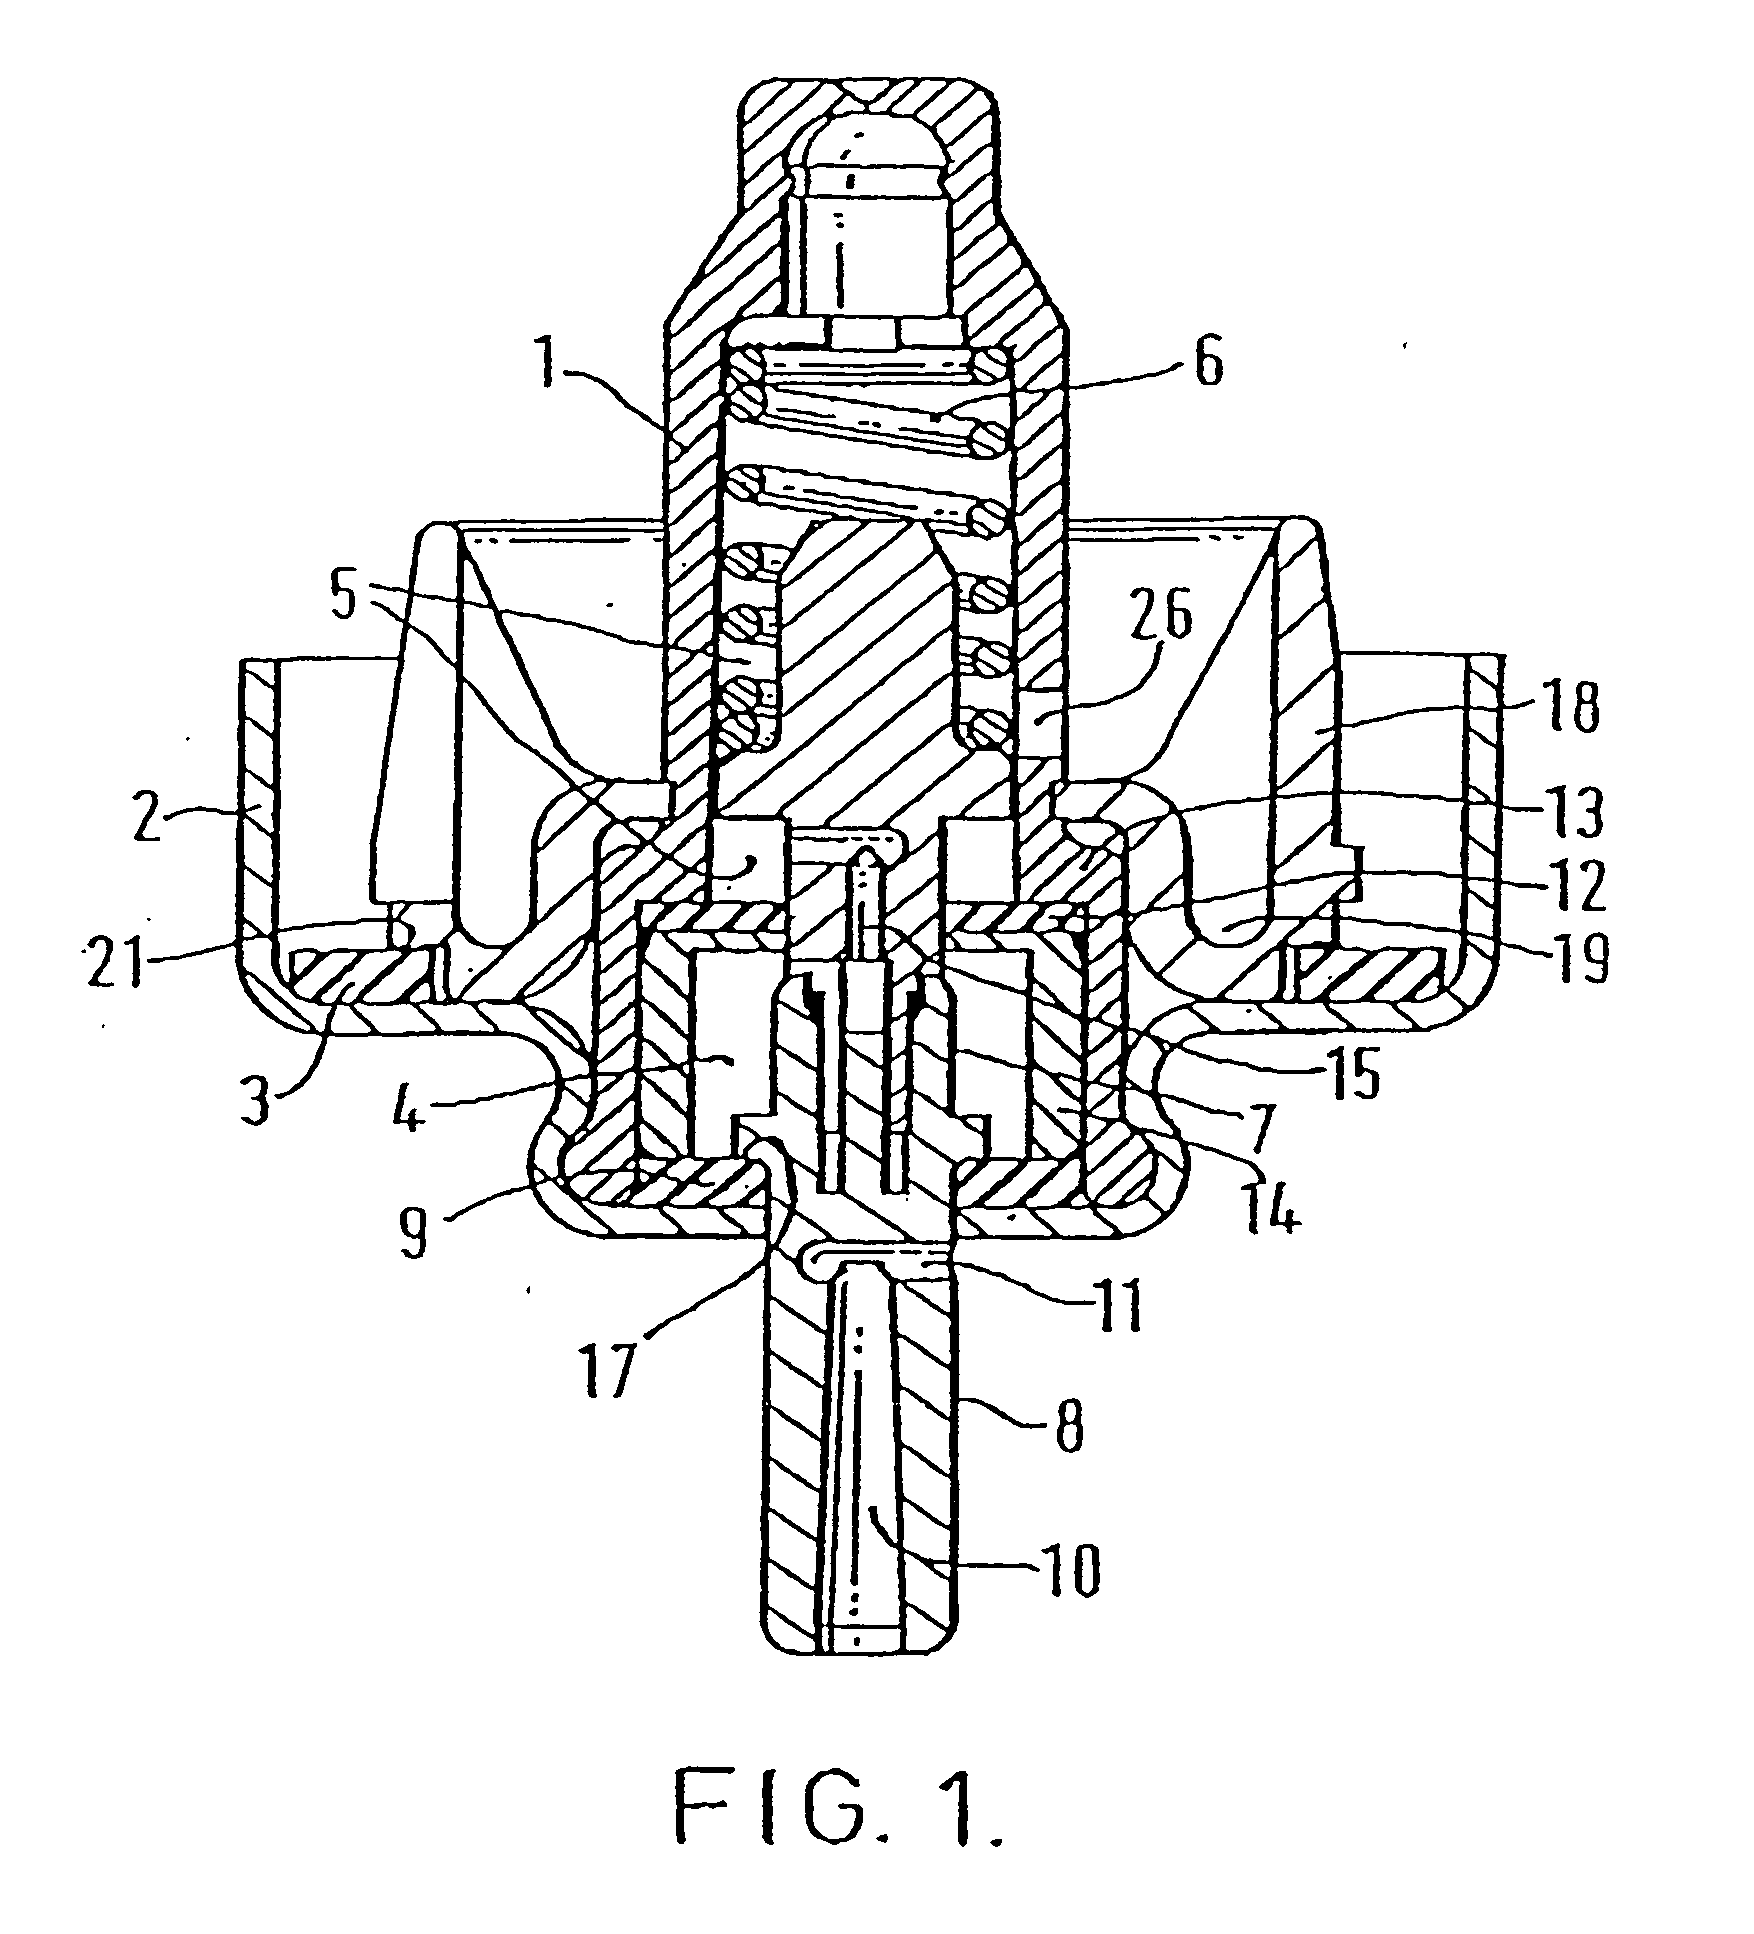 Pharmaceutical metered dose inhaler and methods relating thereto